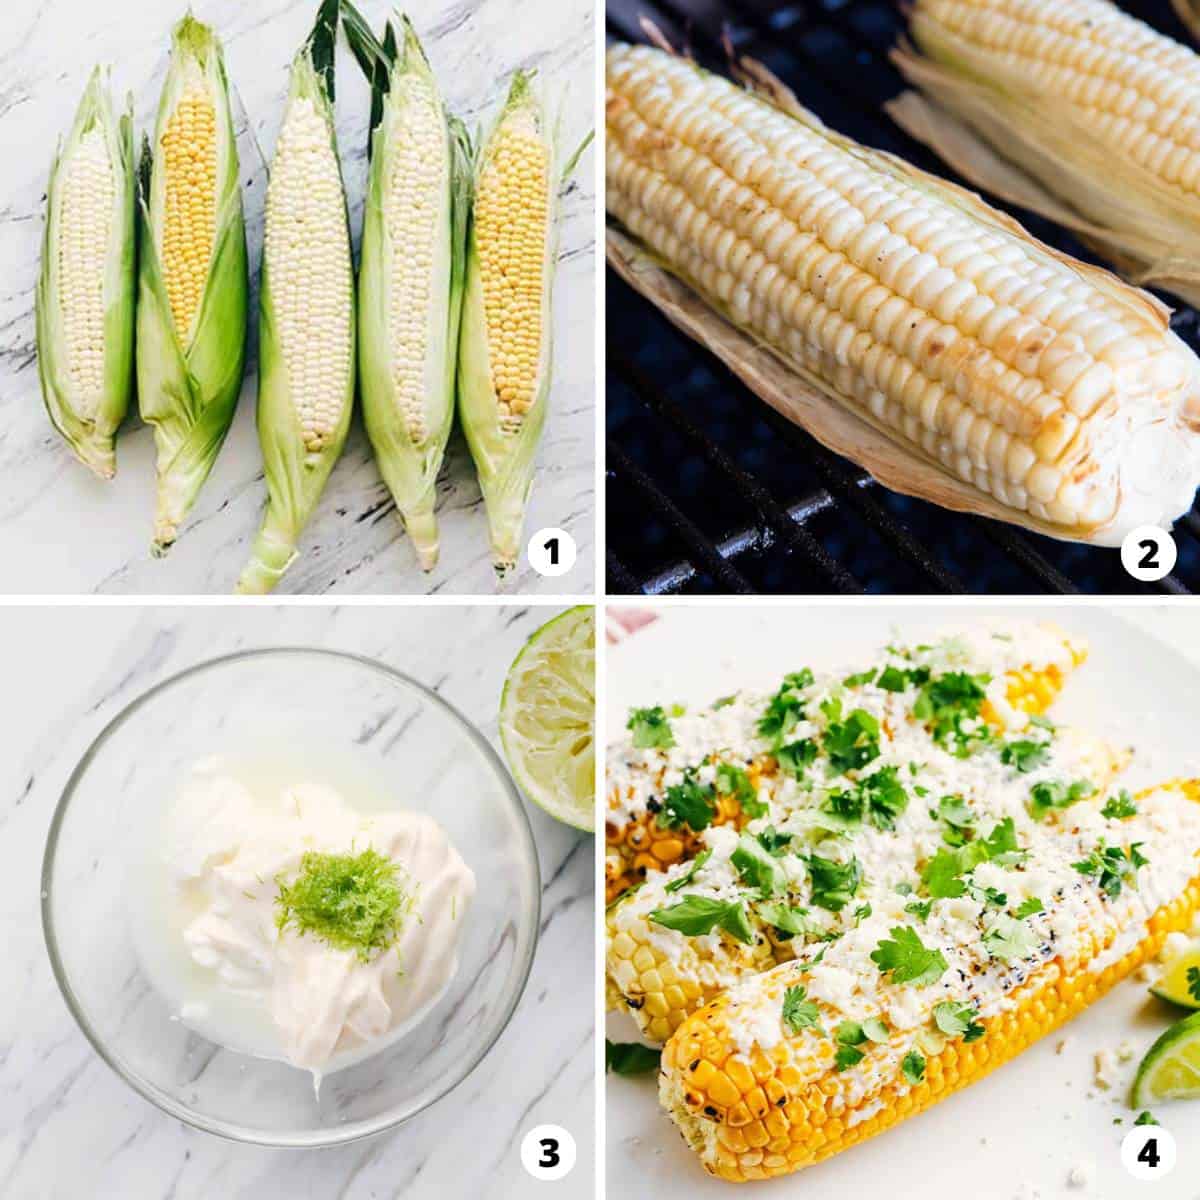 The process of making Mexican street corn in a four step photo collage. 